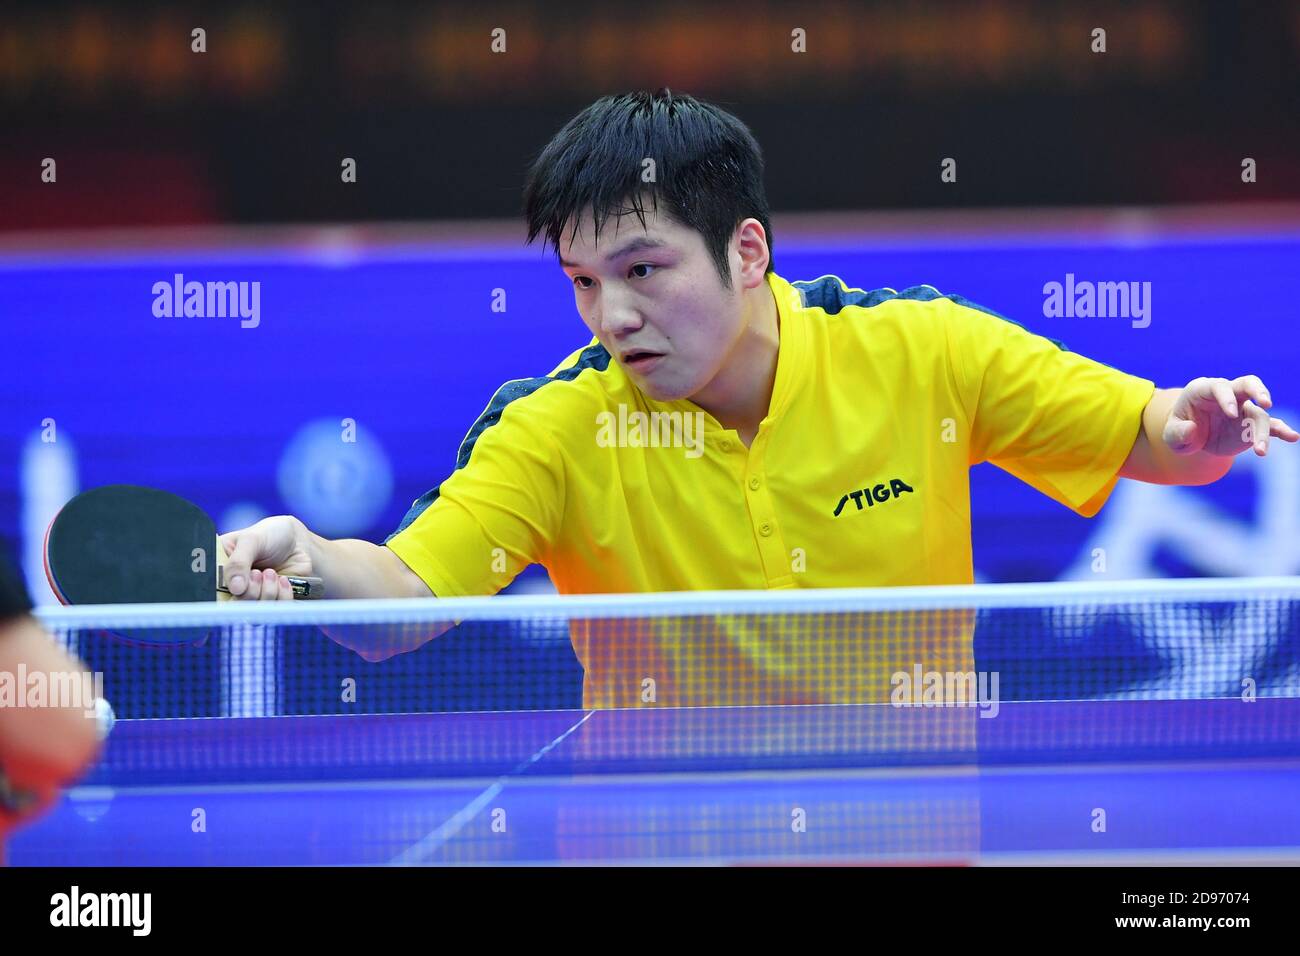 Chinese table tennis player Fan Zhendong competes against Chinese table tennis player Ma Long at the final of 2020 China National Table Tennis Championships, Weihai city, east China’s Shandong province, 10 October 2020. Stock Photo